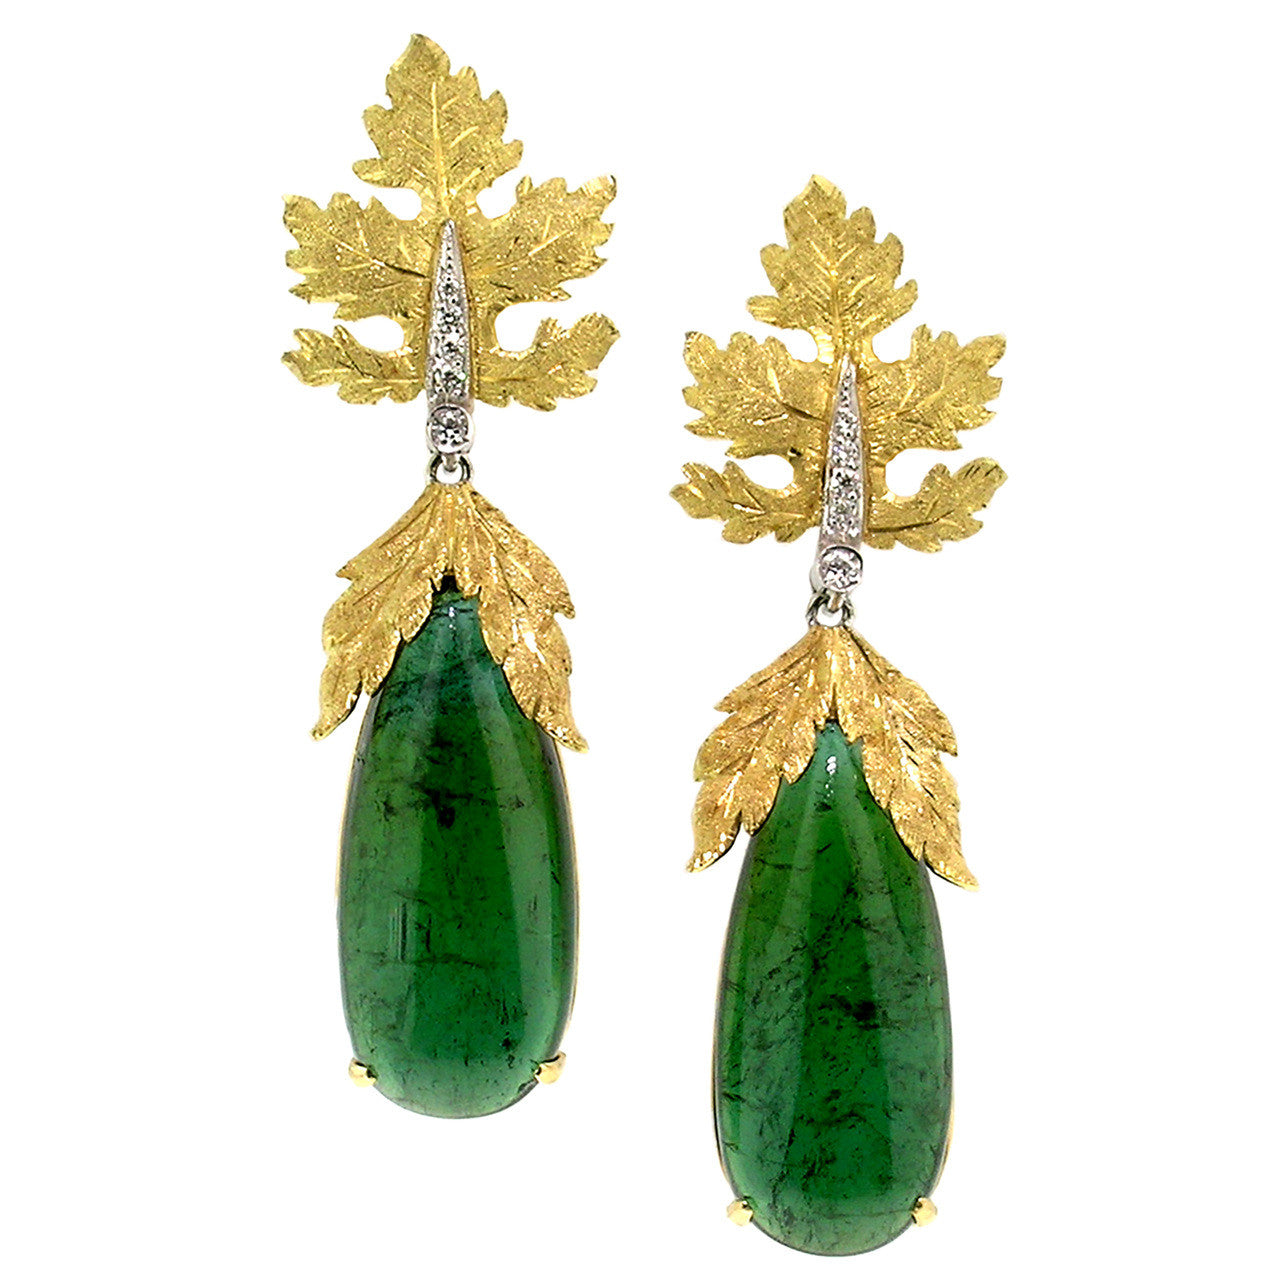 Green Tourmaline Diamond 18kt Sylvia Earrings made in Florence, Italy for Cynthia Scott Jewelry